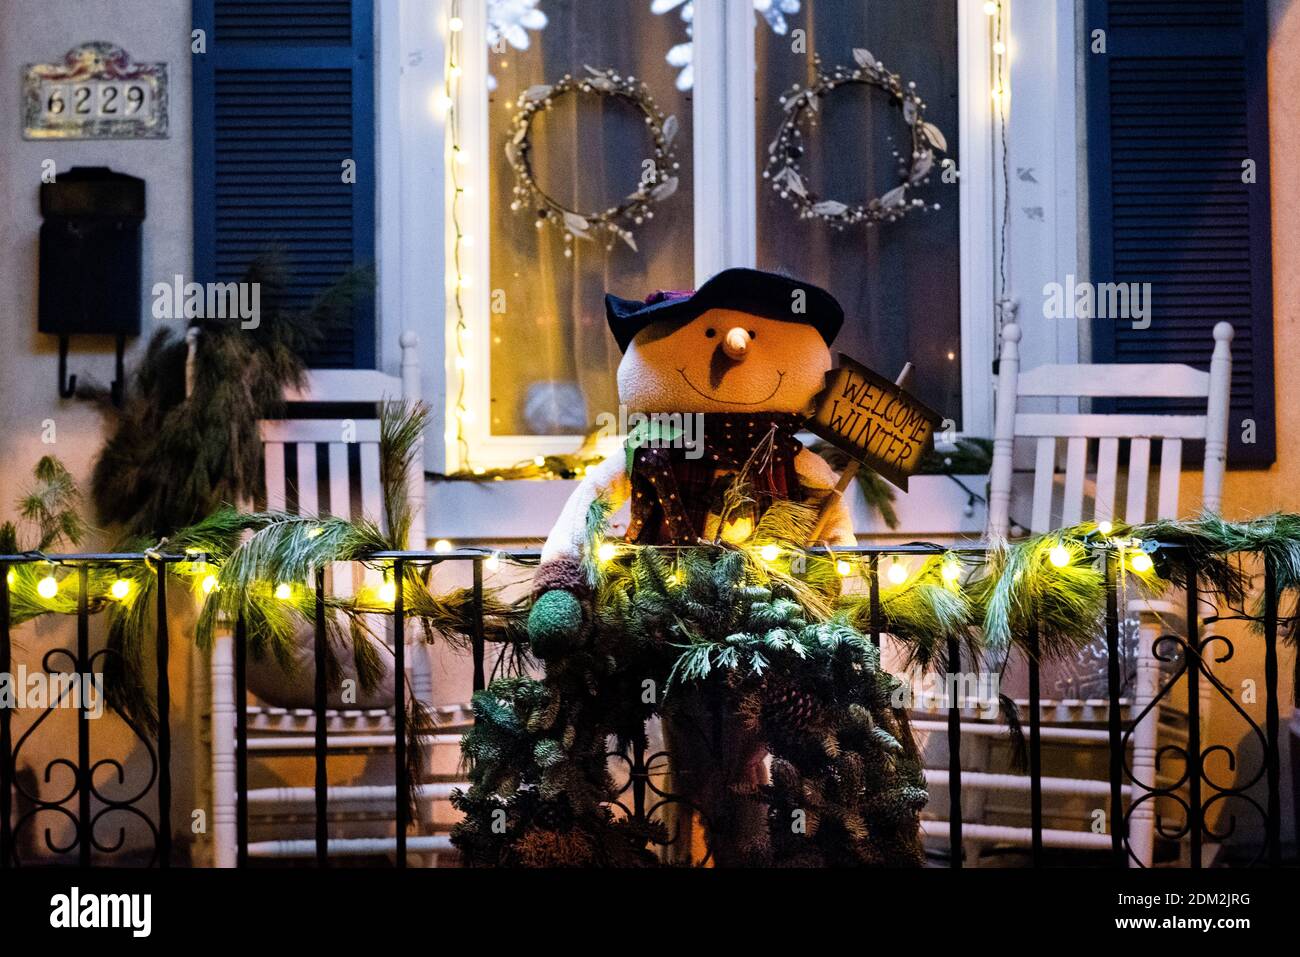 Philadelphia, PA. Roxborough residents decorate their homes with brightly colored lights, dioramas and festive decorations for the Winter holidyas. De Stock Photo